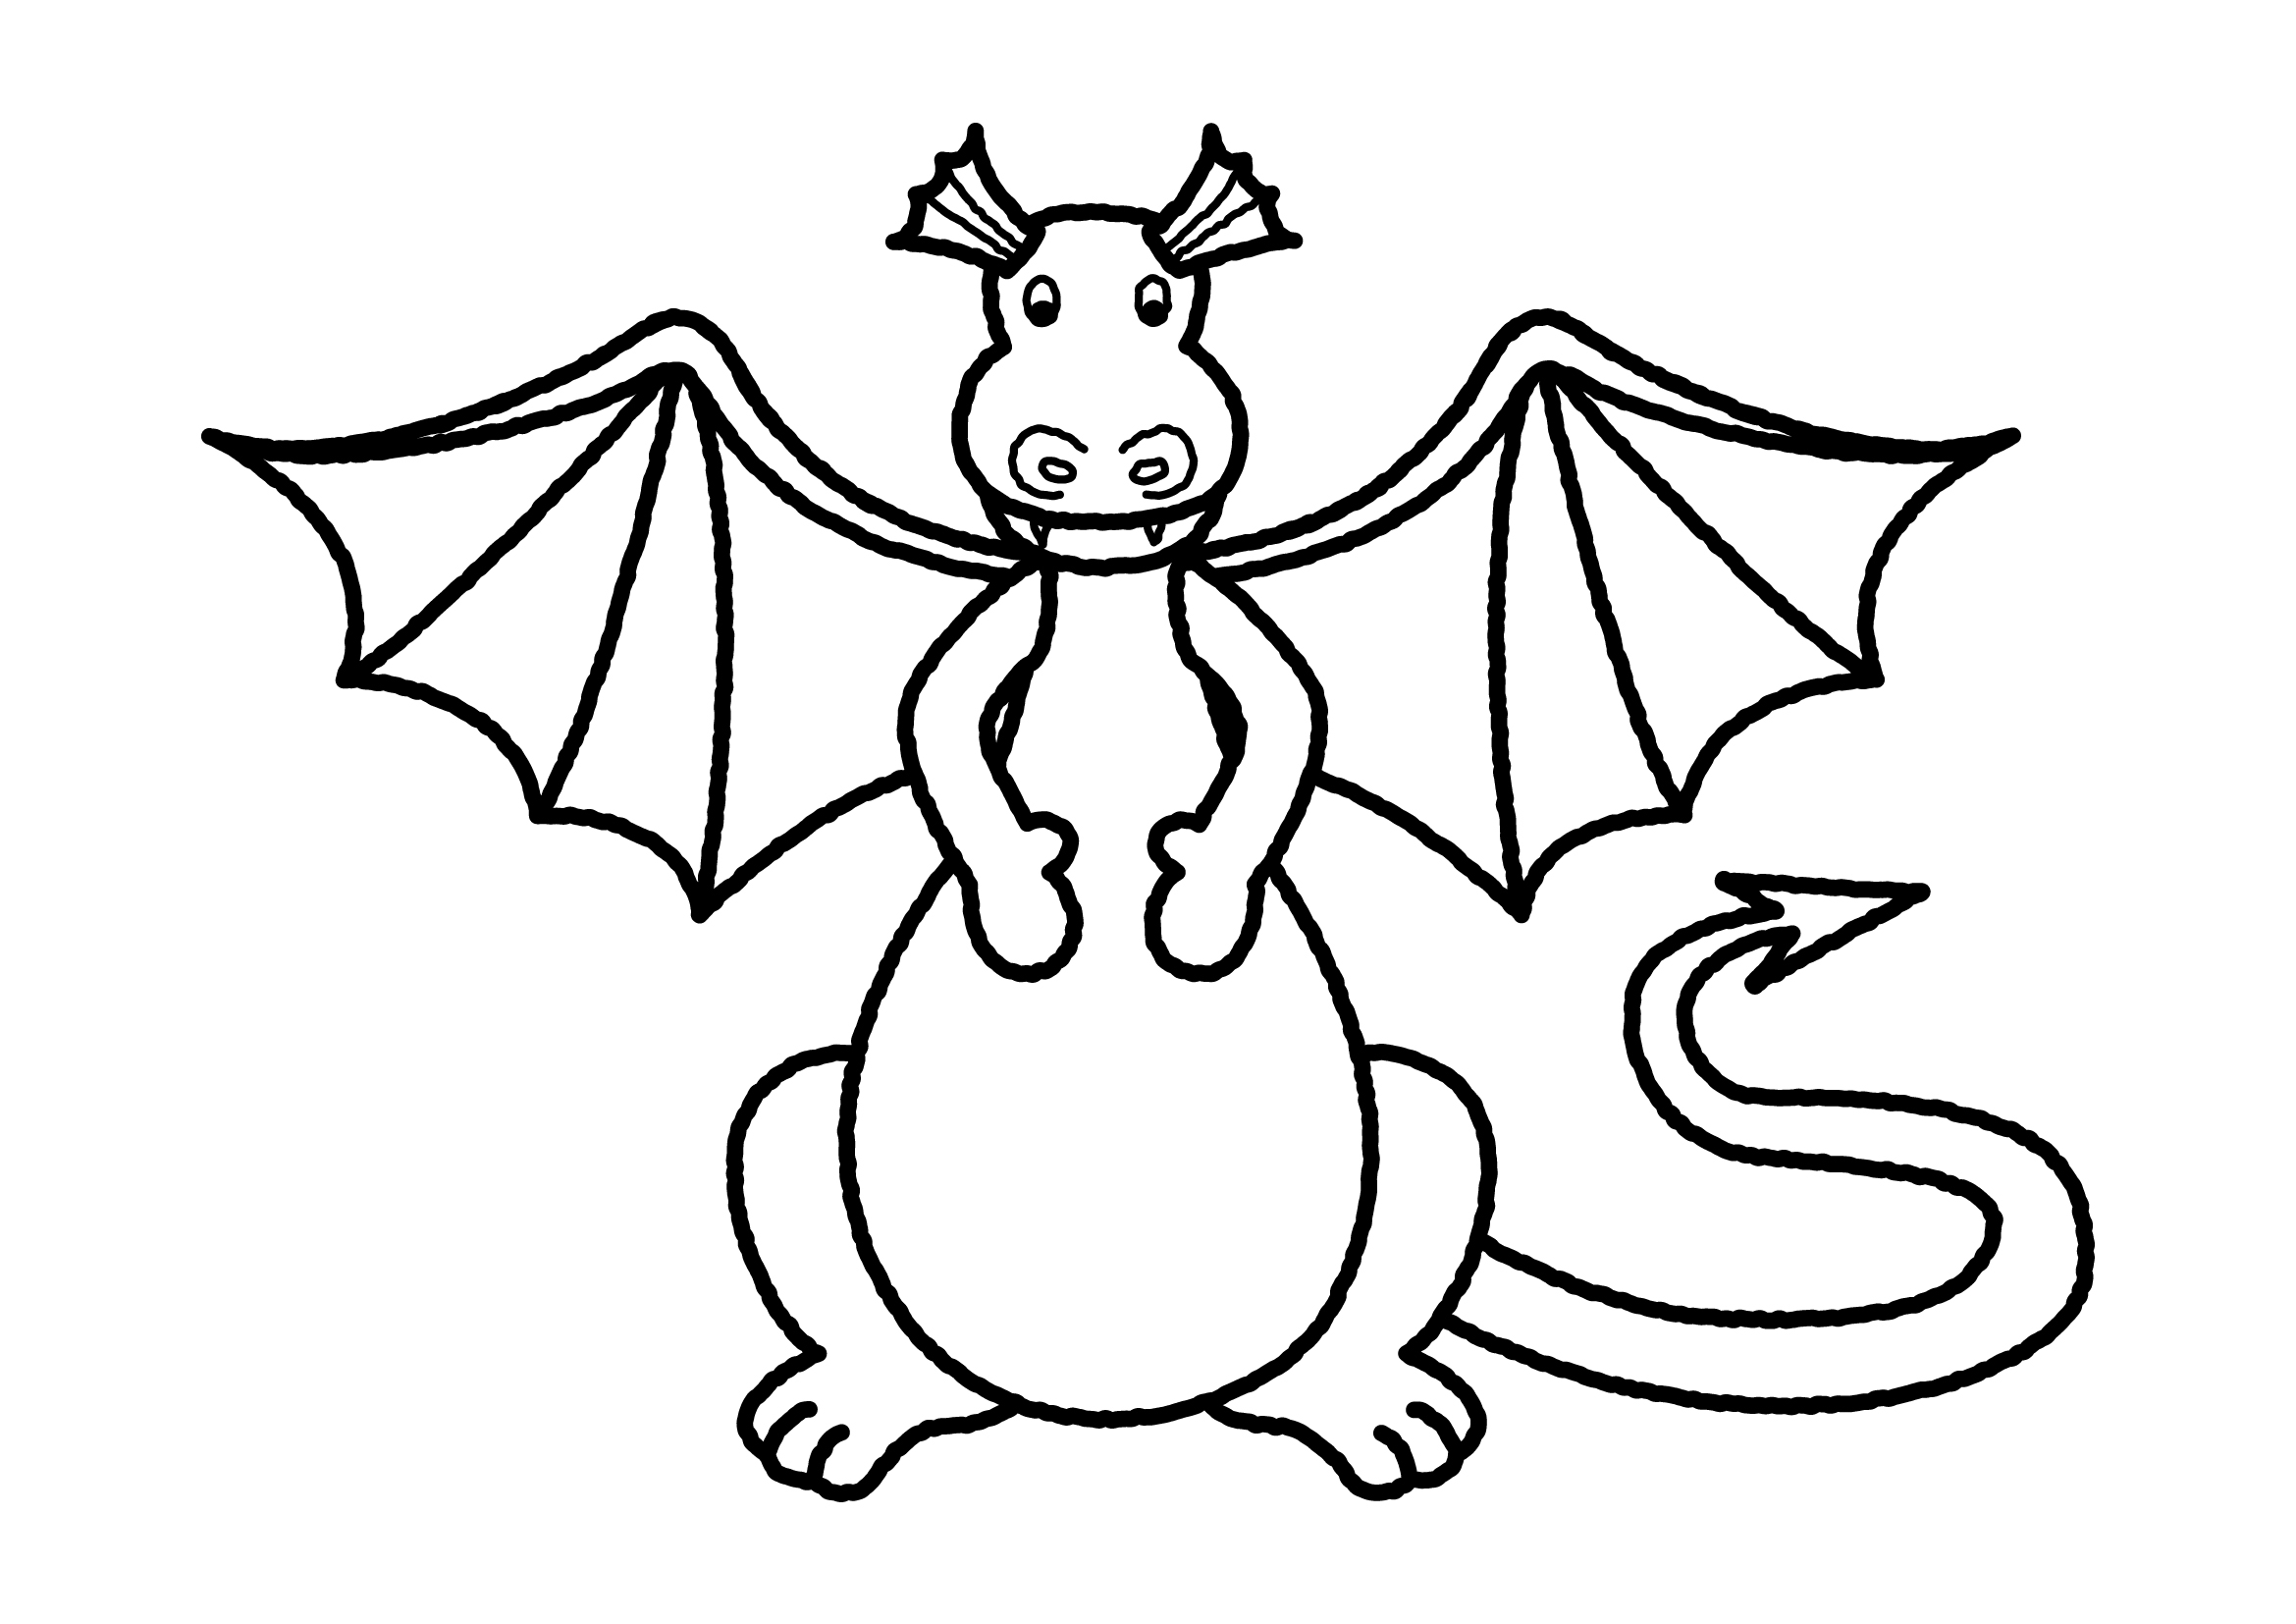 Dragon And Castle Coloring Pages Drawing Free Image